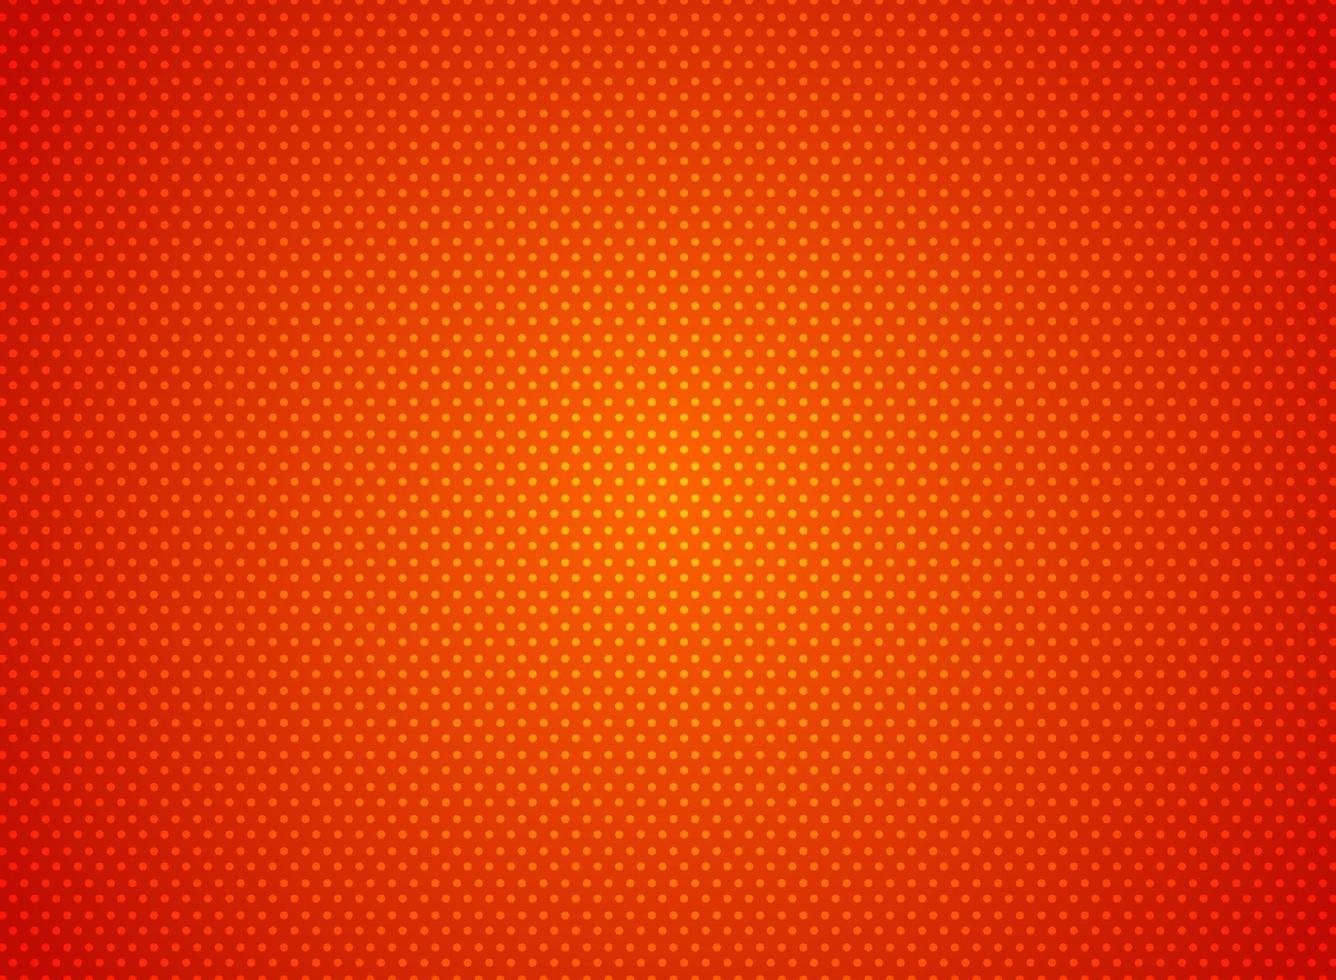 Abstract dots pattern on red background futuristic technology concept. Digital particles element texture. vector